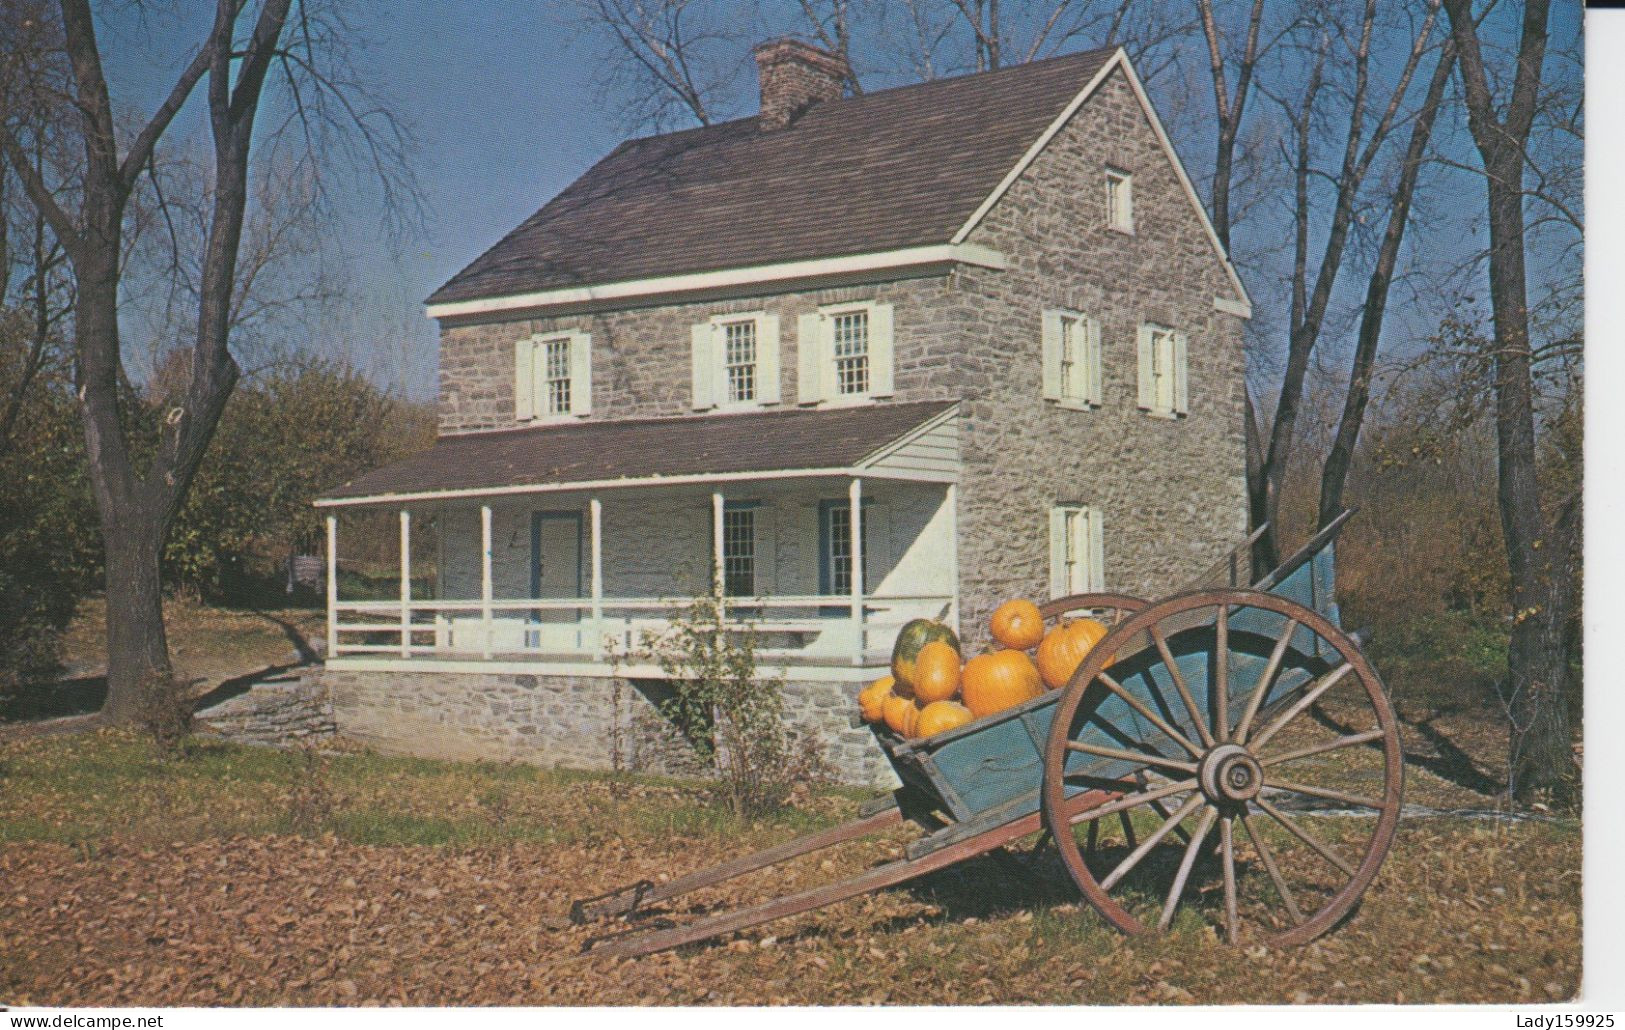 Hagers Fancy Hagerstown Maryland U S Pumpkins Stone House In The Countryside 2sc - Hagerstown